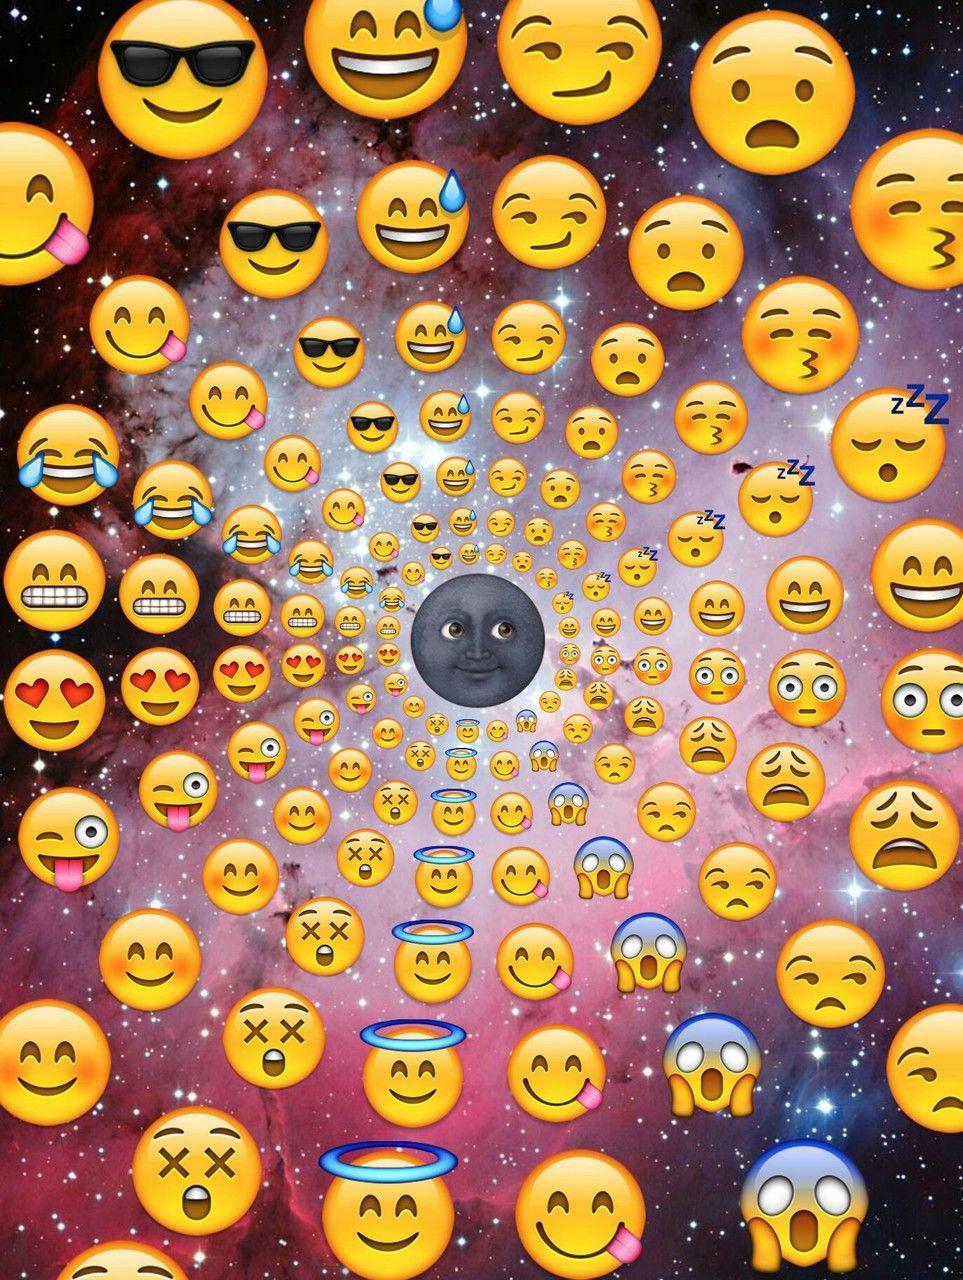 image about Emoji Wallpaper. See more about